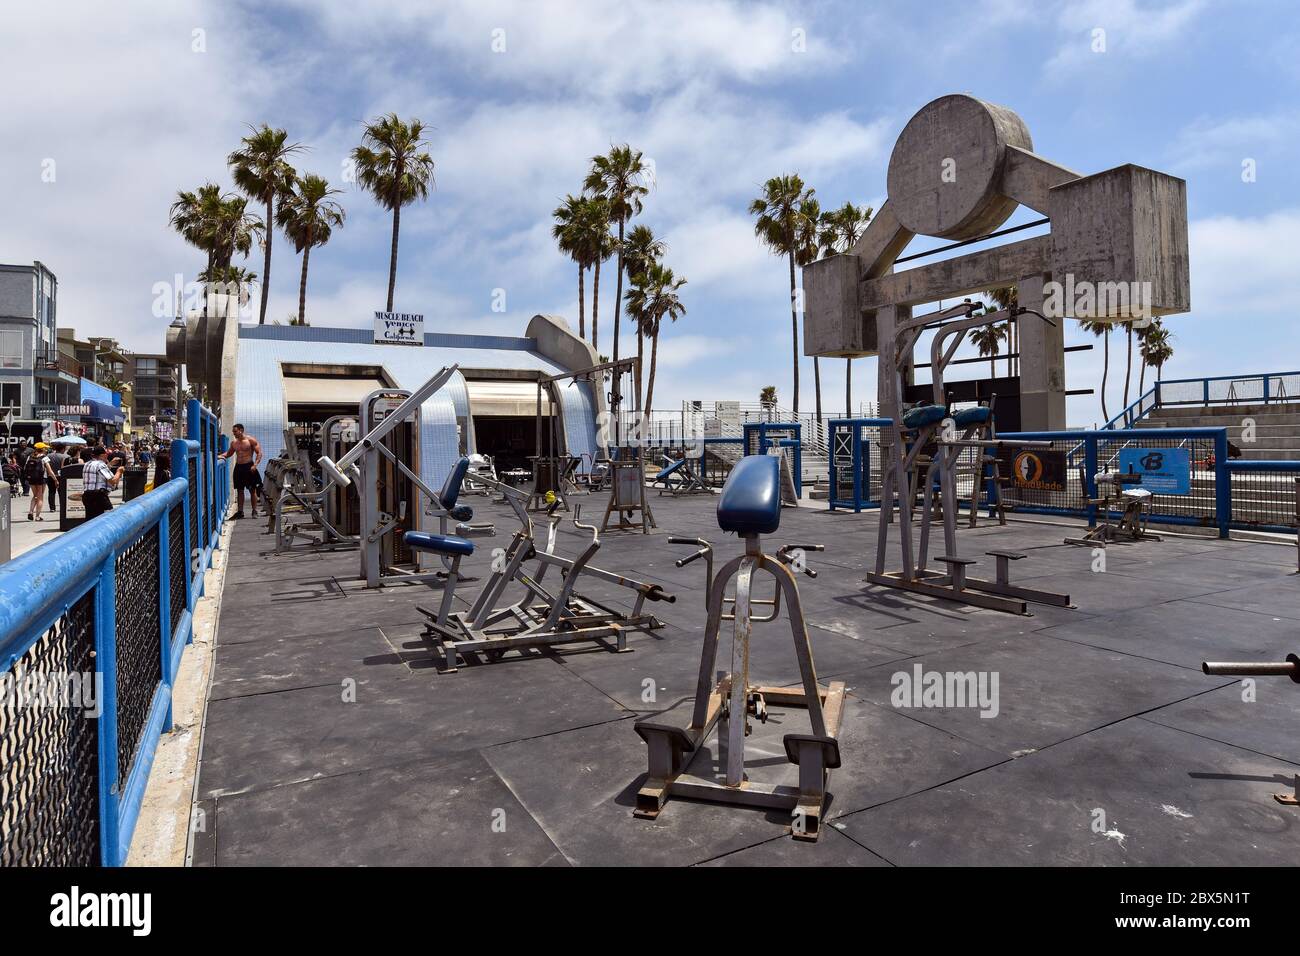 Muscle Beach is a landmark, outdoor gym dating back to the 1930's where celebrities and famous bodybuilders trained. Stock Photo